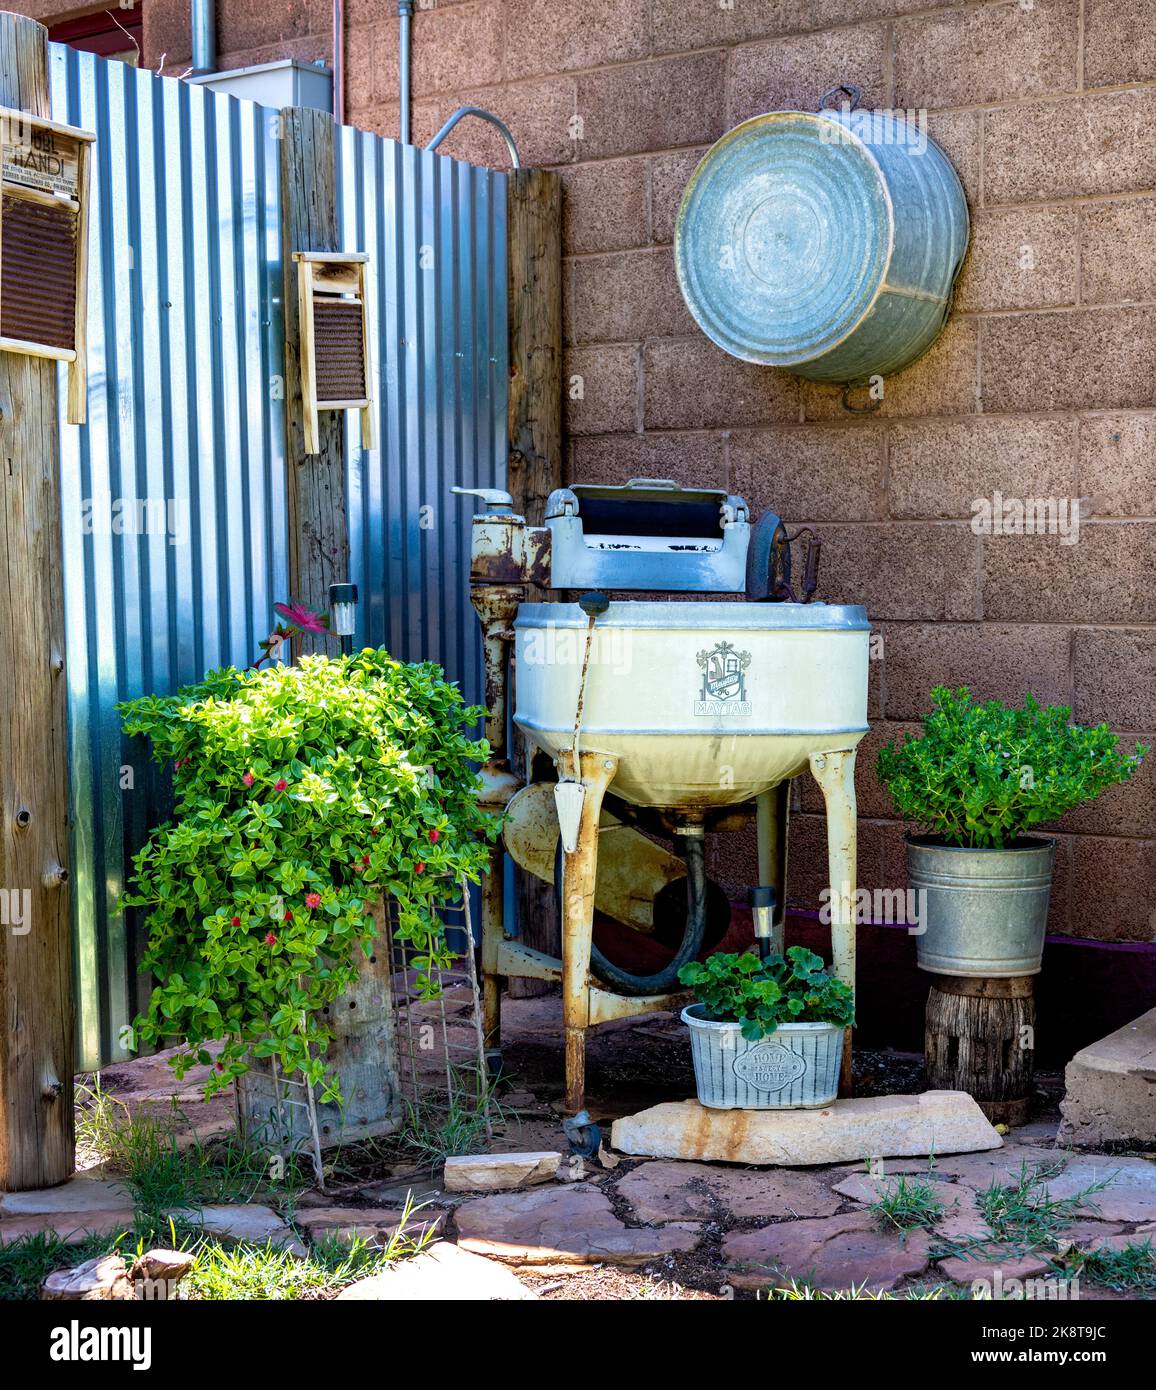 A vertical shot of vintage washing machine and green plants against stone wall in the backyard Stock Photo